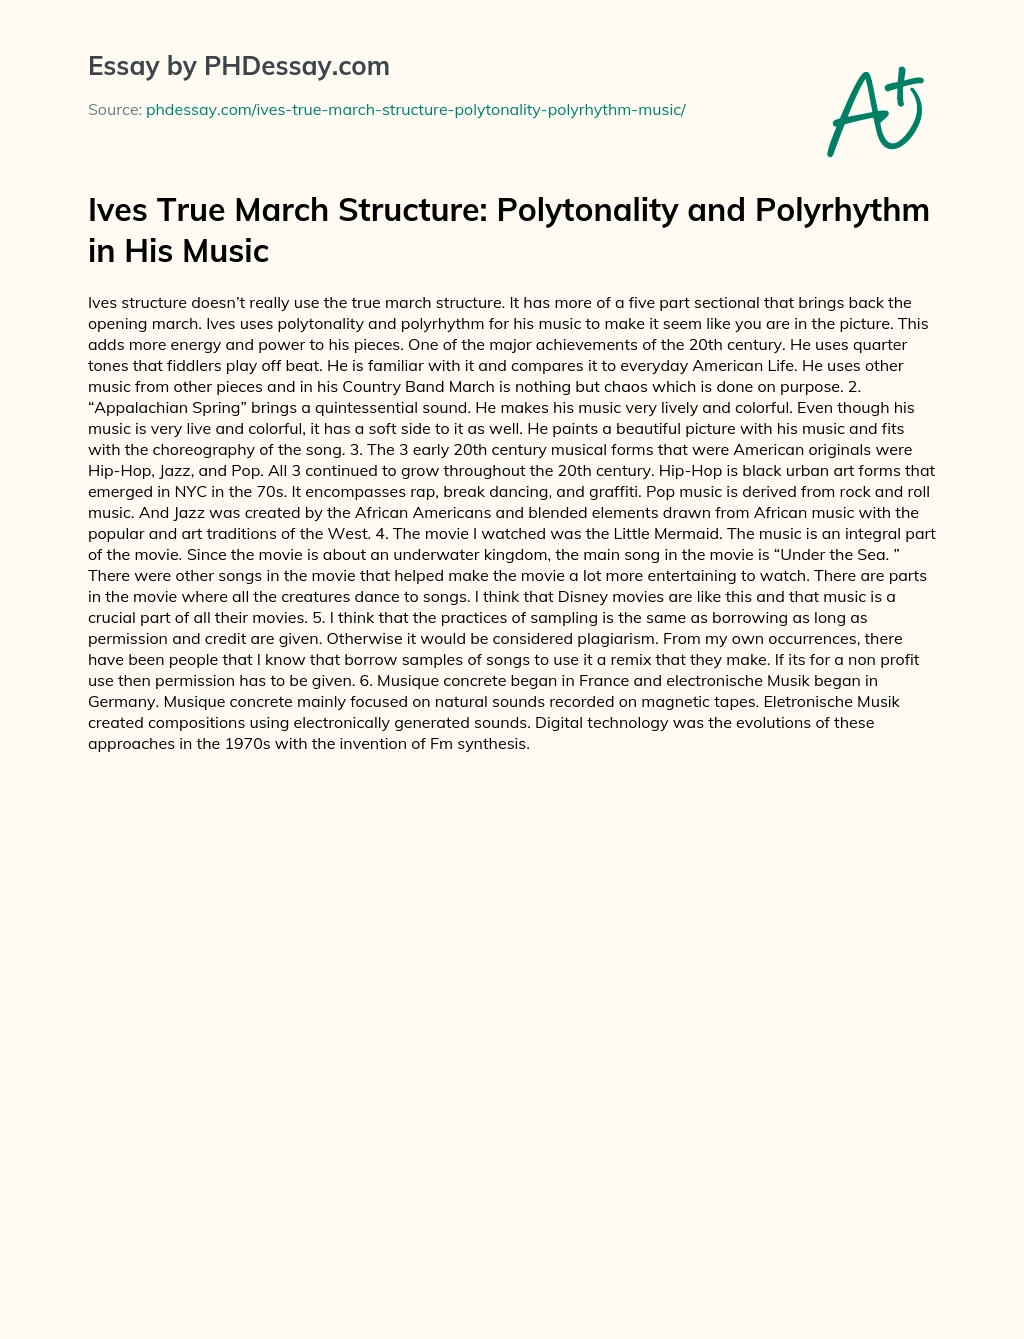 Ives True March Structure: Polytonality and Polyrhythm in His Music essay